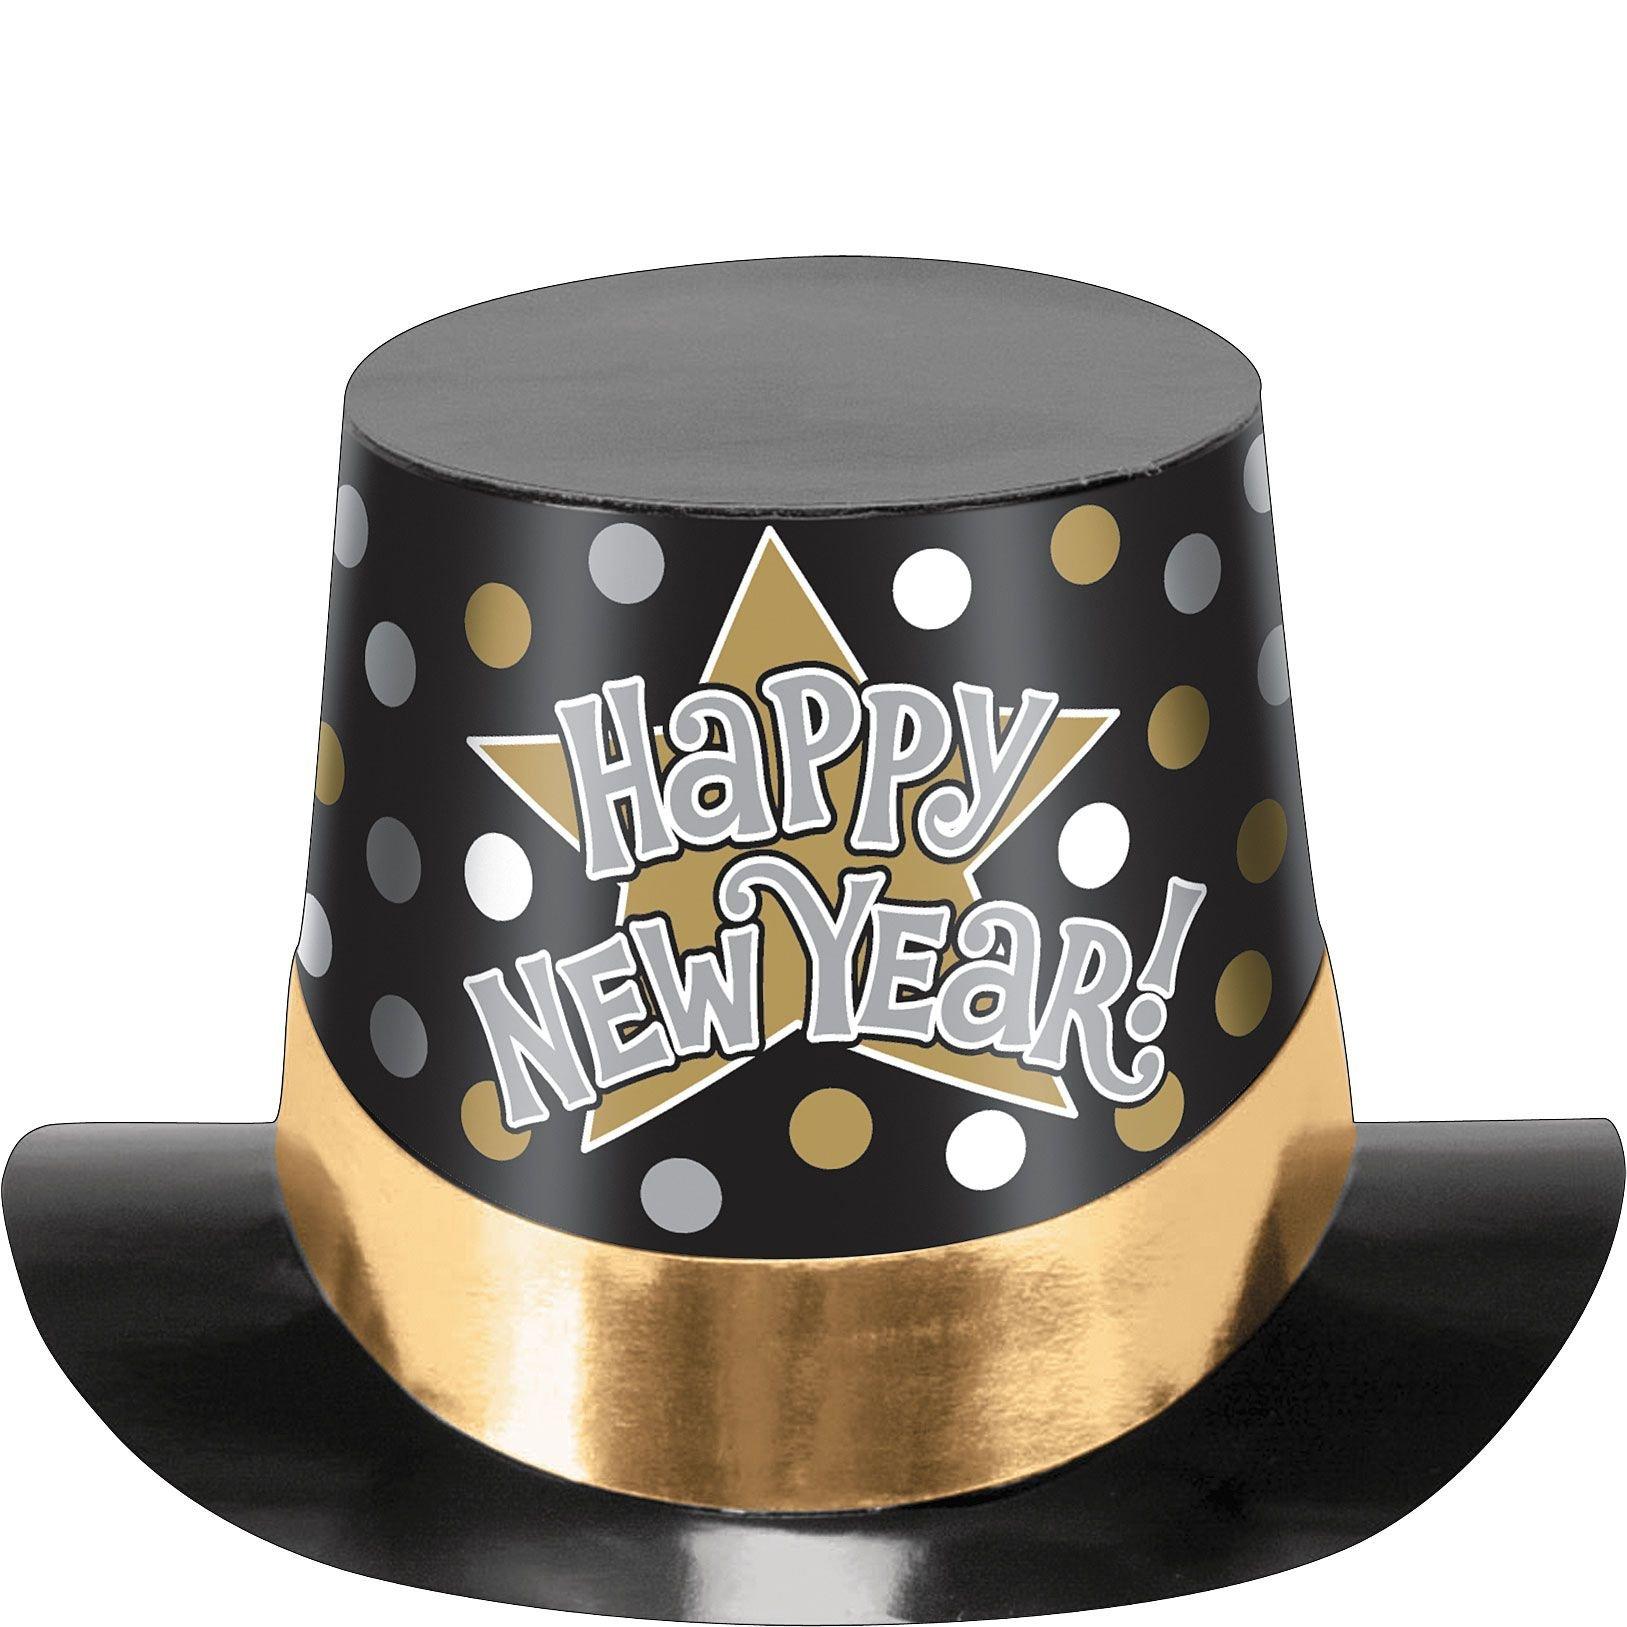 new years eve hat images